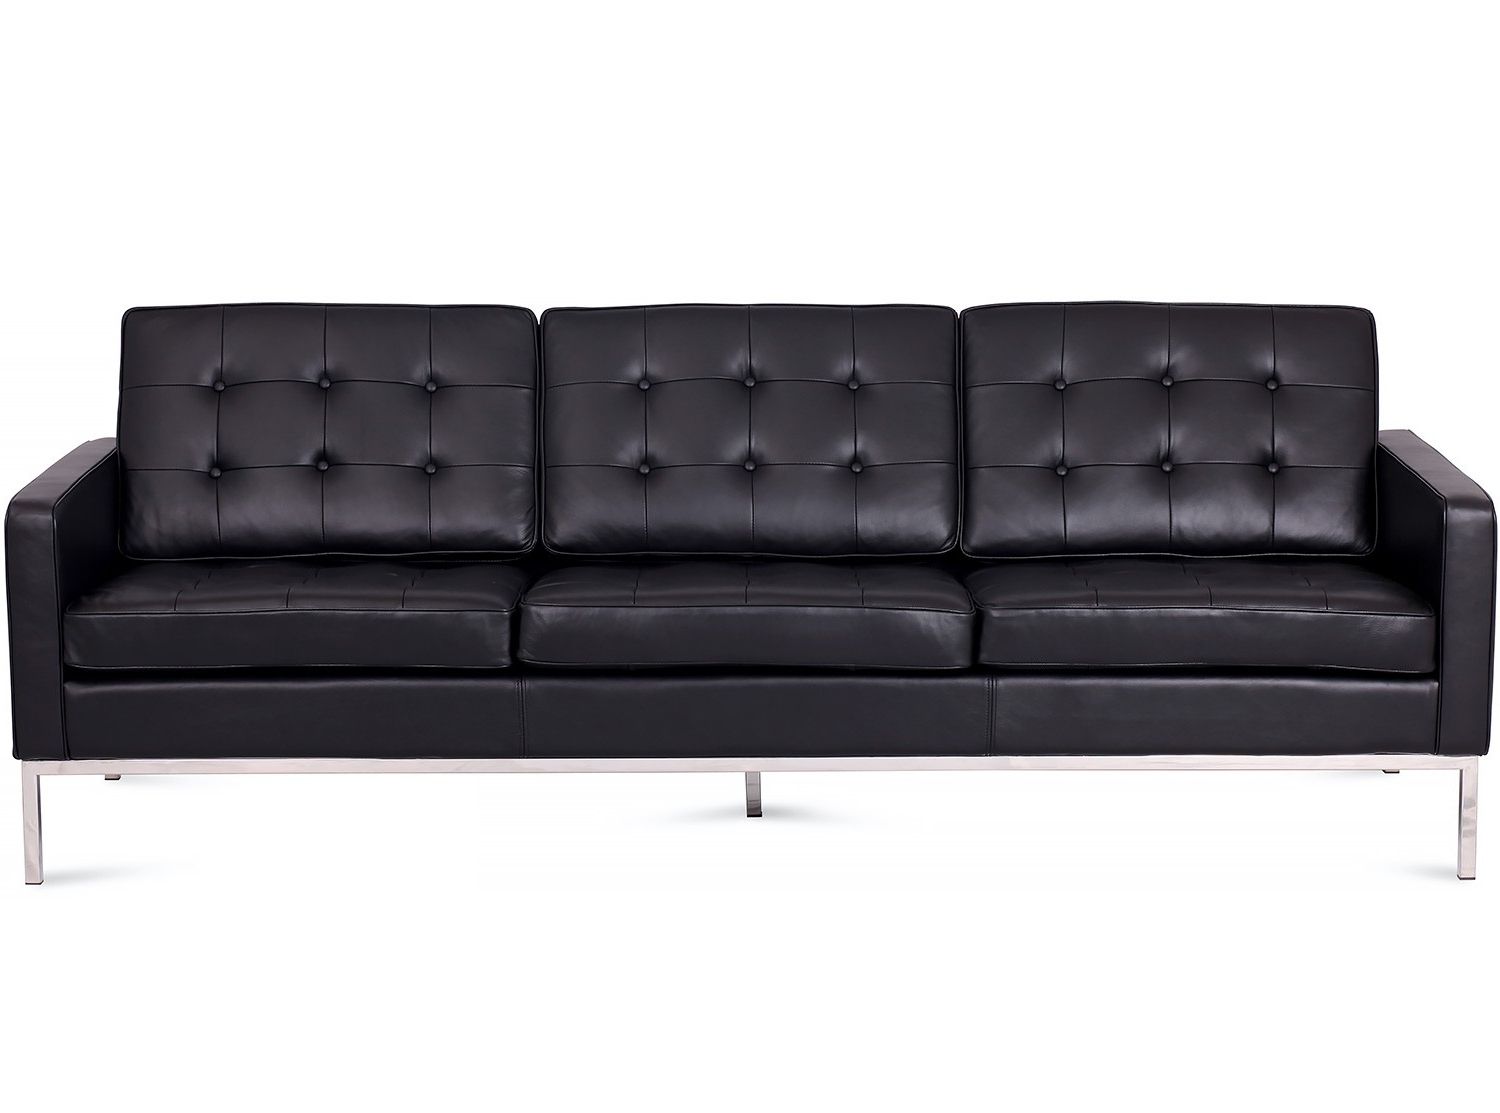 Florence Knoll Leather Sofas Regarding Latest Florence Knoll Sofa 3 Seater Leather (platinum Replica) (View 1 of 20)